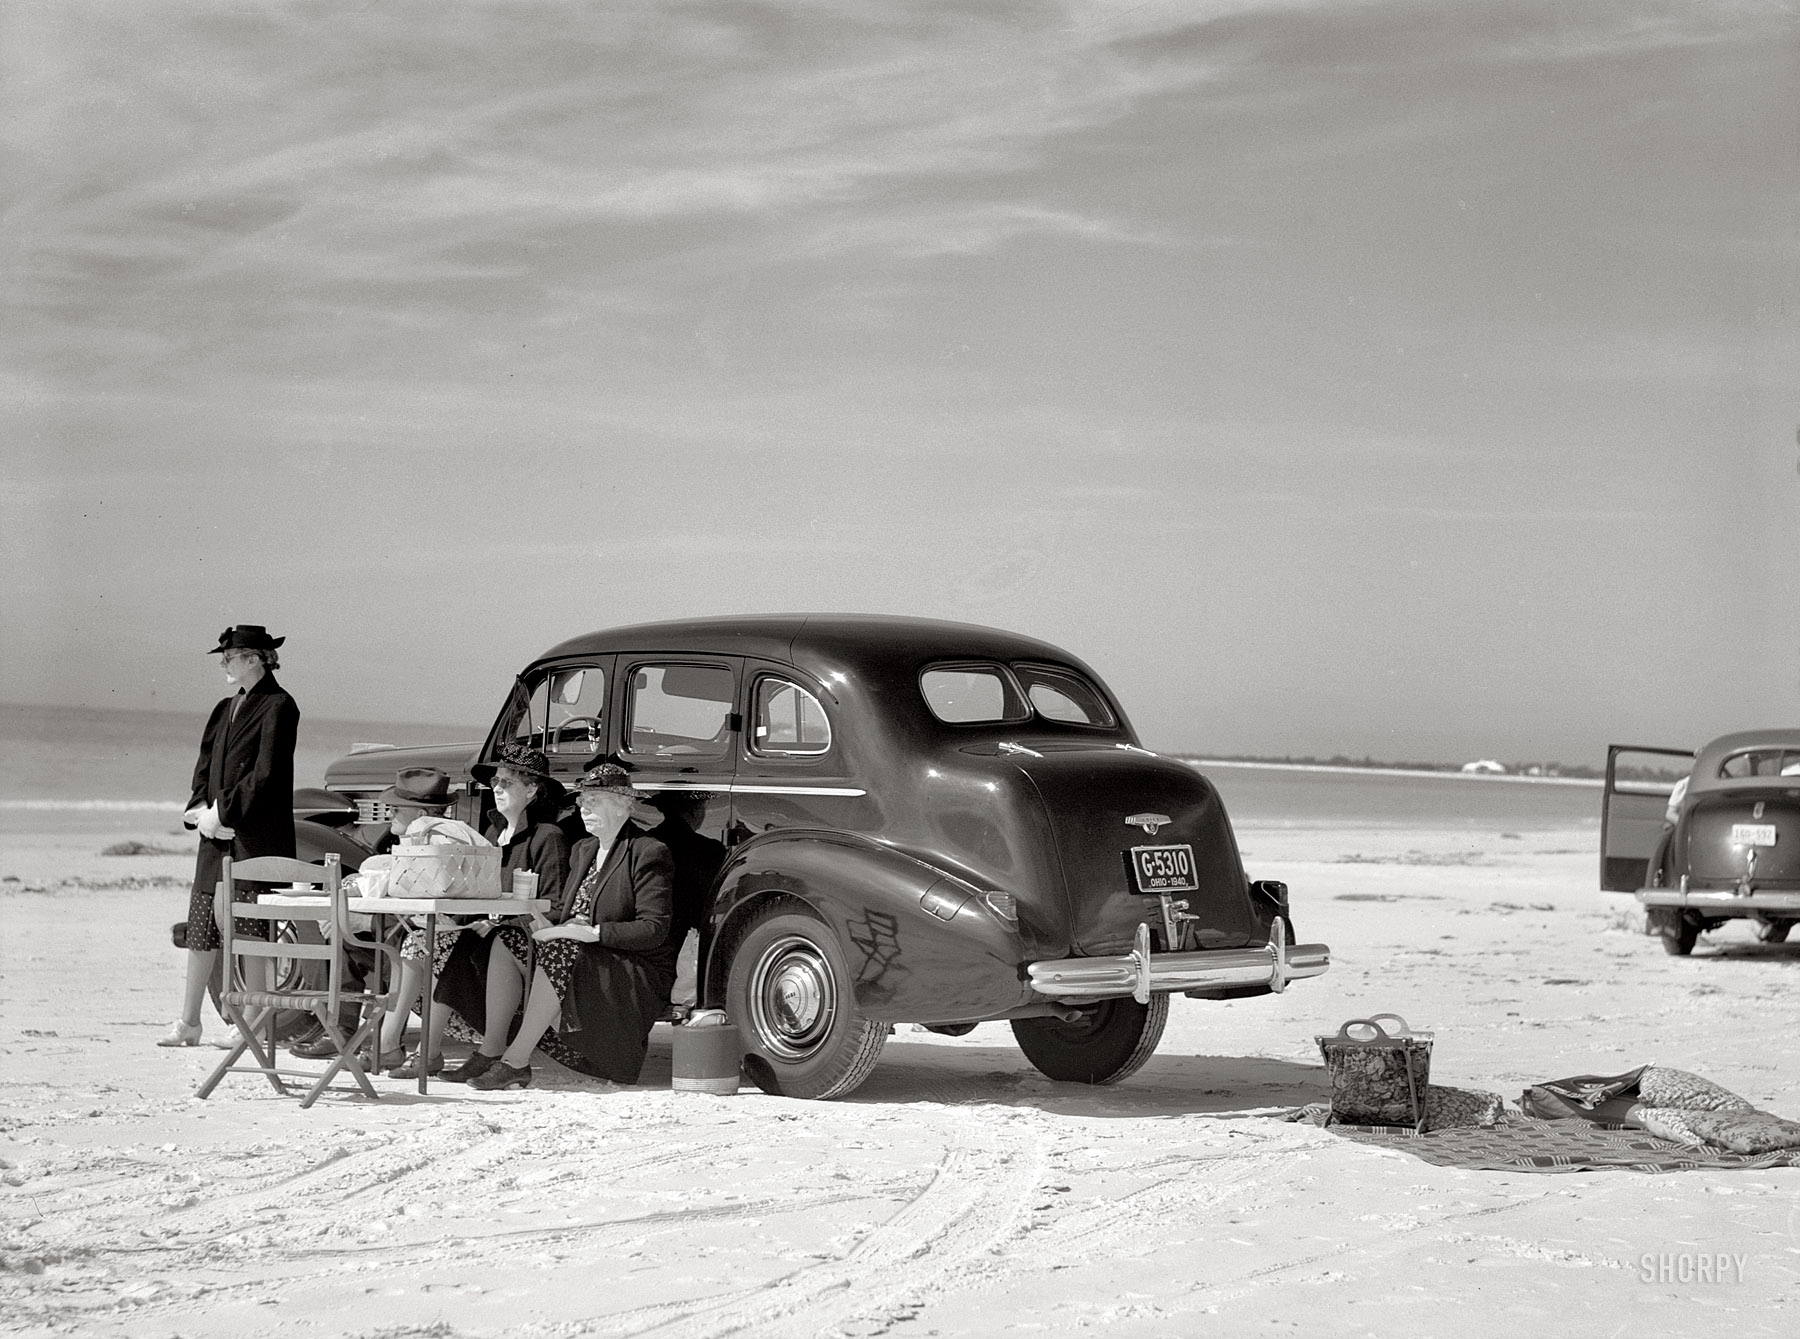 January 1941. Sarasota, Florida. "Guests of Sarasota trailer park picnicking at the beach." Medium format negative by Marion Post Wolcott.  View full size.